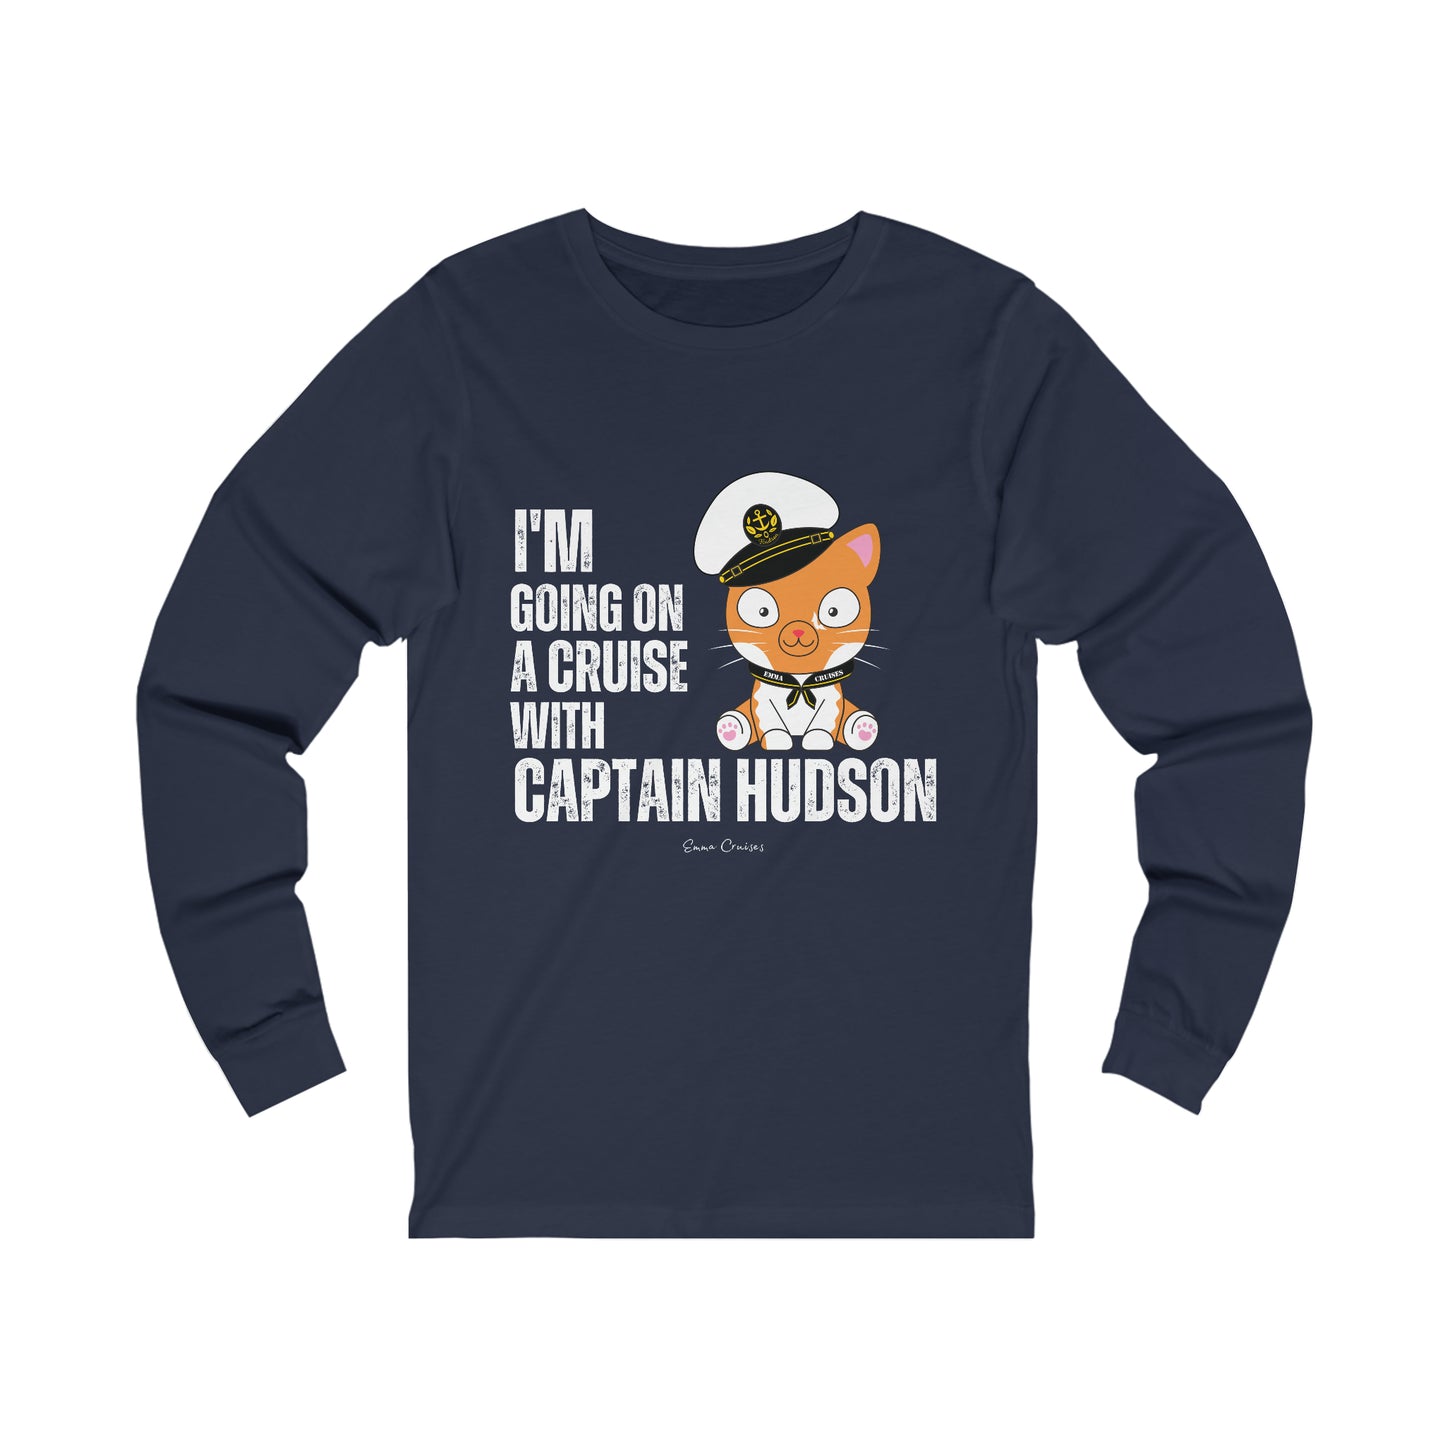 I’m Going on a Cruise With Captain Hudson - UNISEX T-Shirt